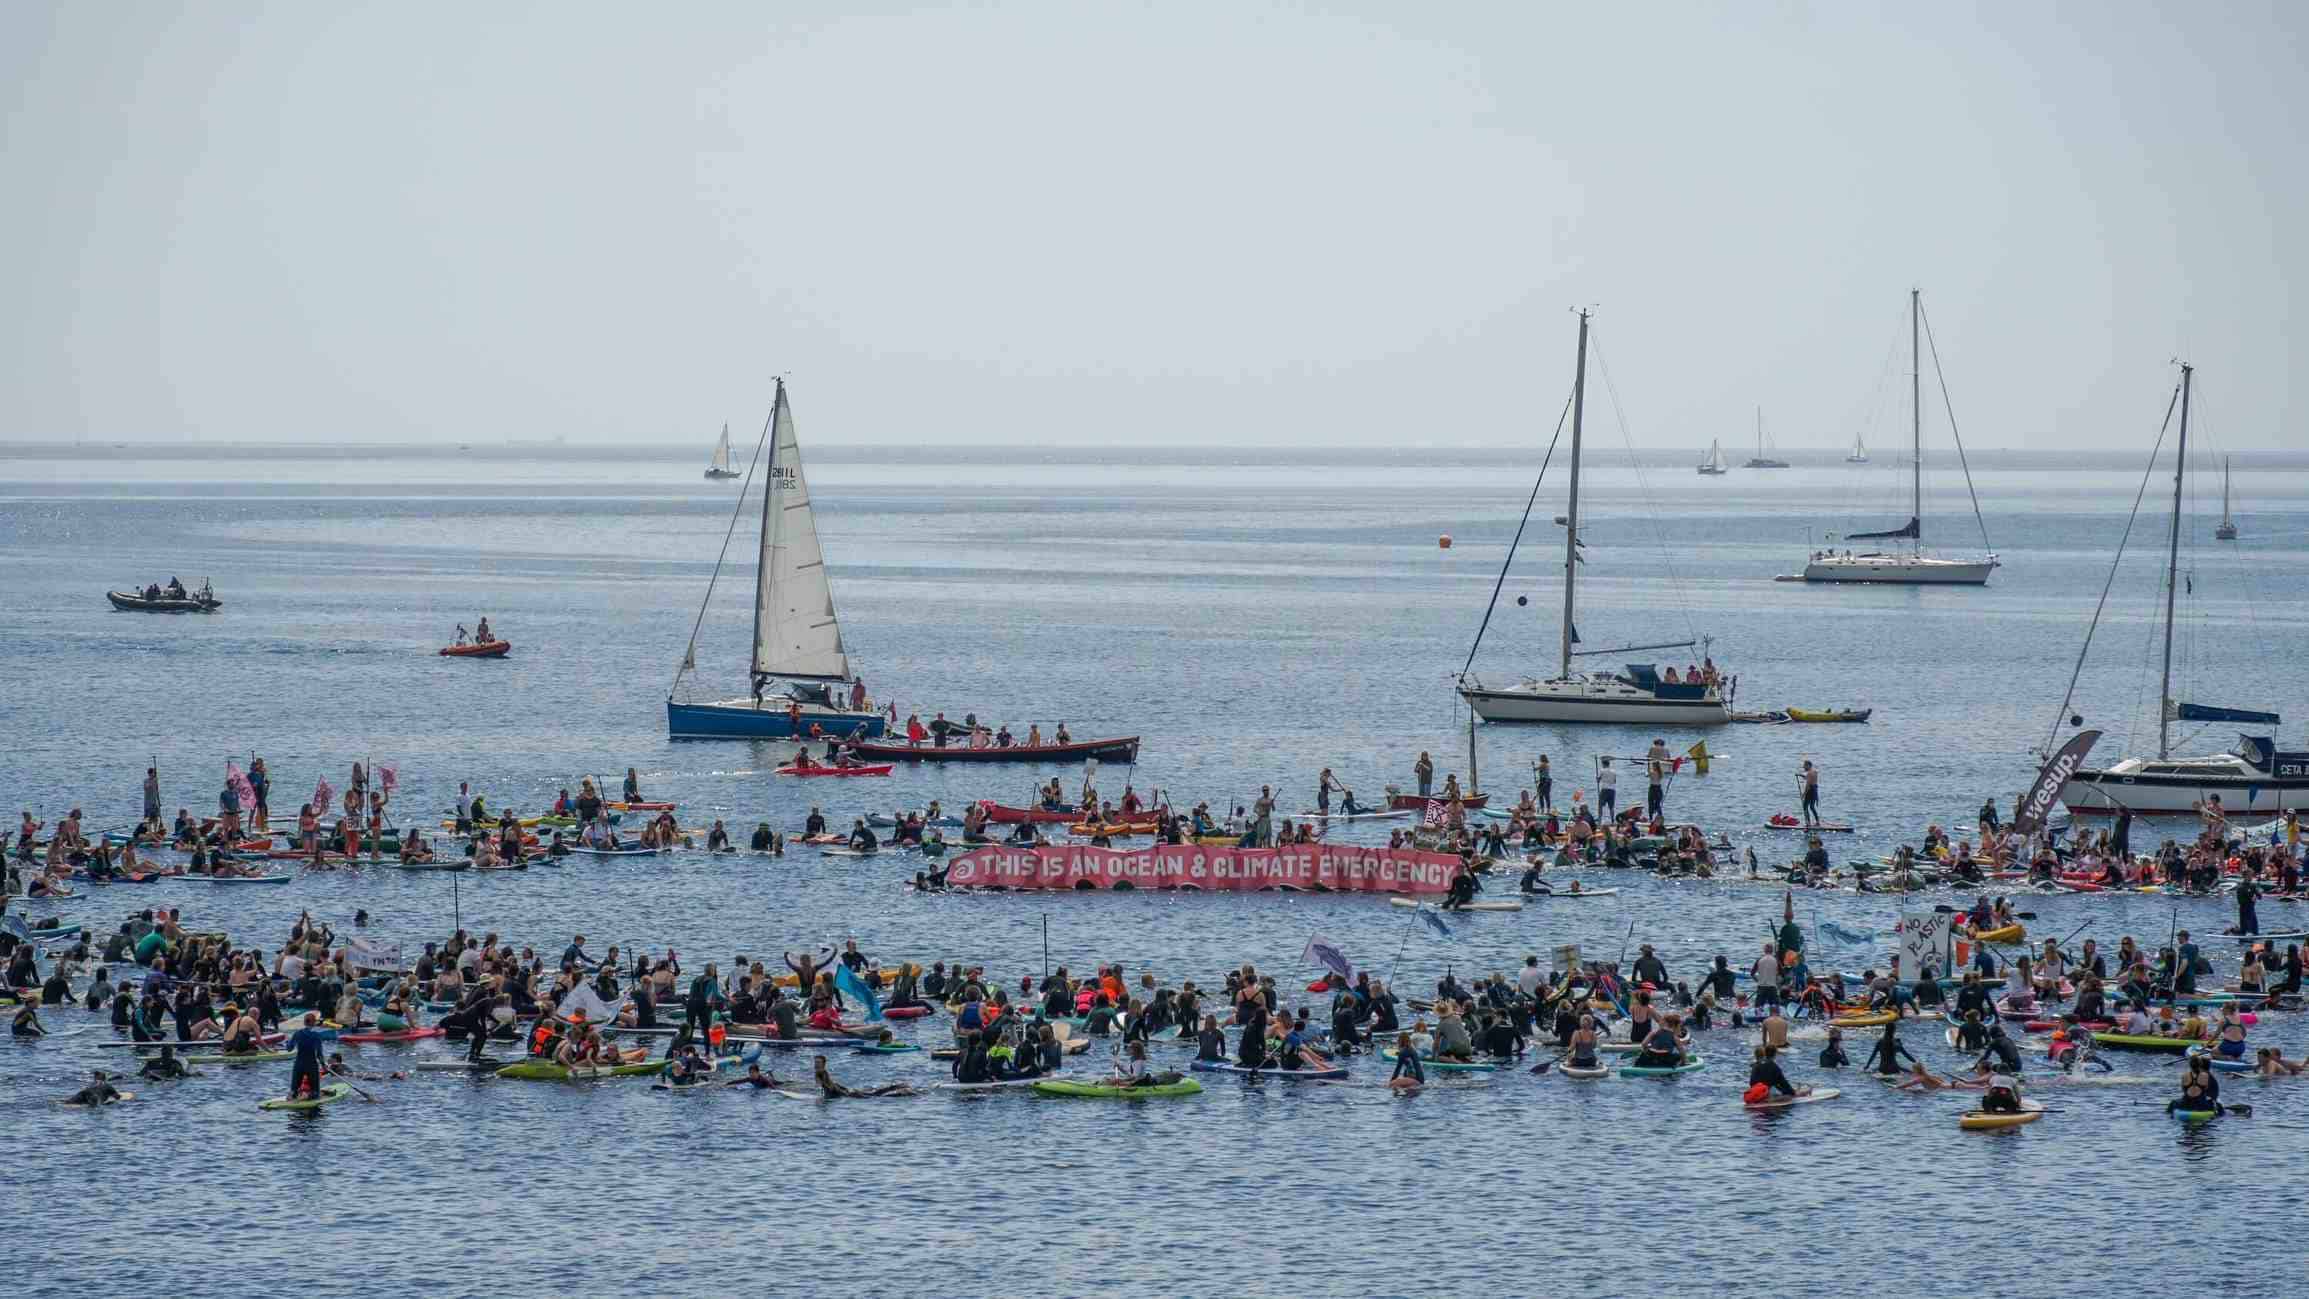 Wide-angle shot showing hundreds of people in a blue-grey sea. They have formed a ring, and in the centre of the ring protesters hold a long red banner that reads 'This is an ocean &climate emergency' alongside the SAS logo. Various yachts are dotted in the background.